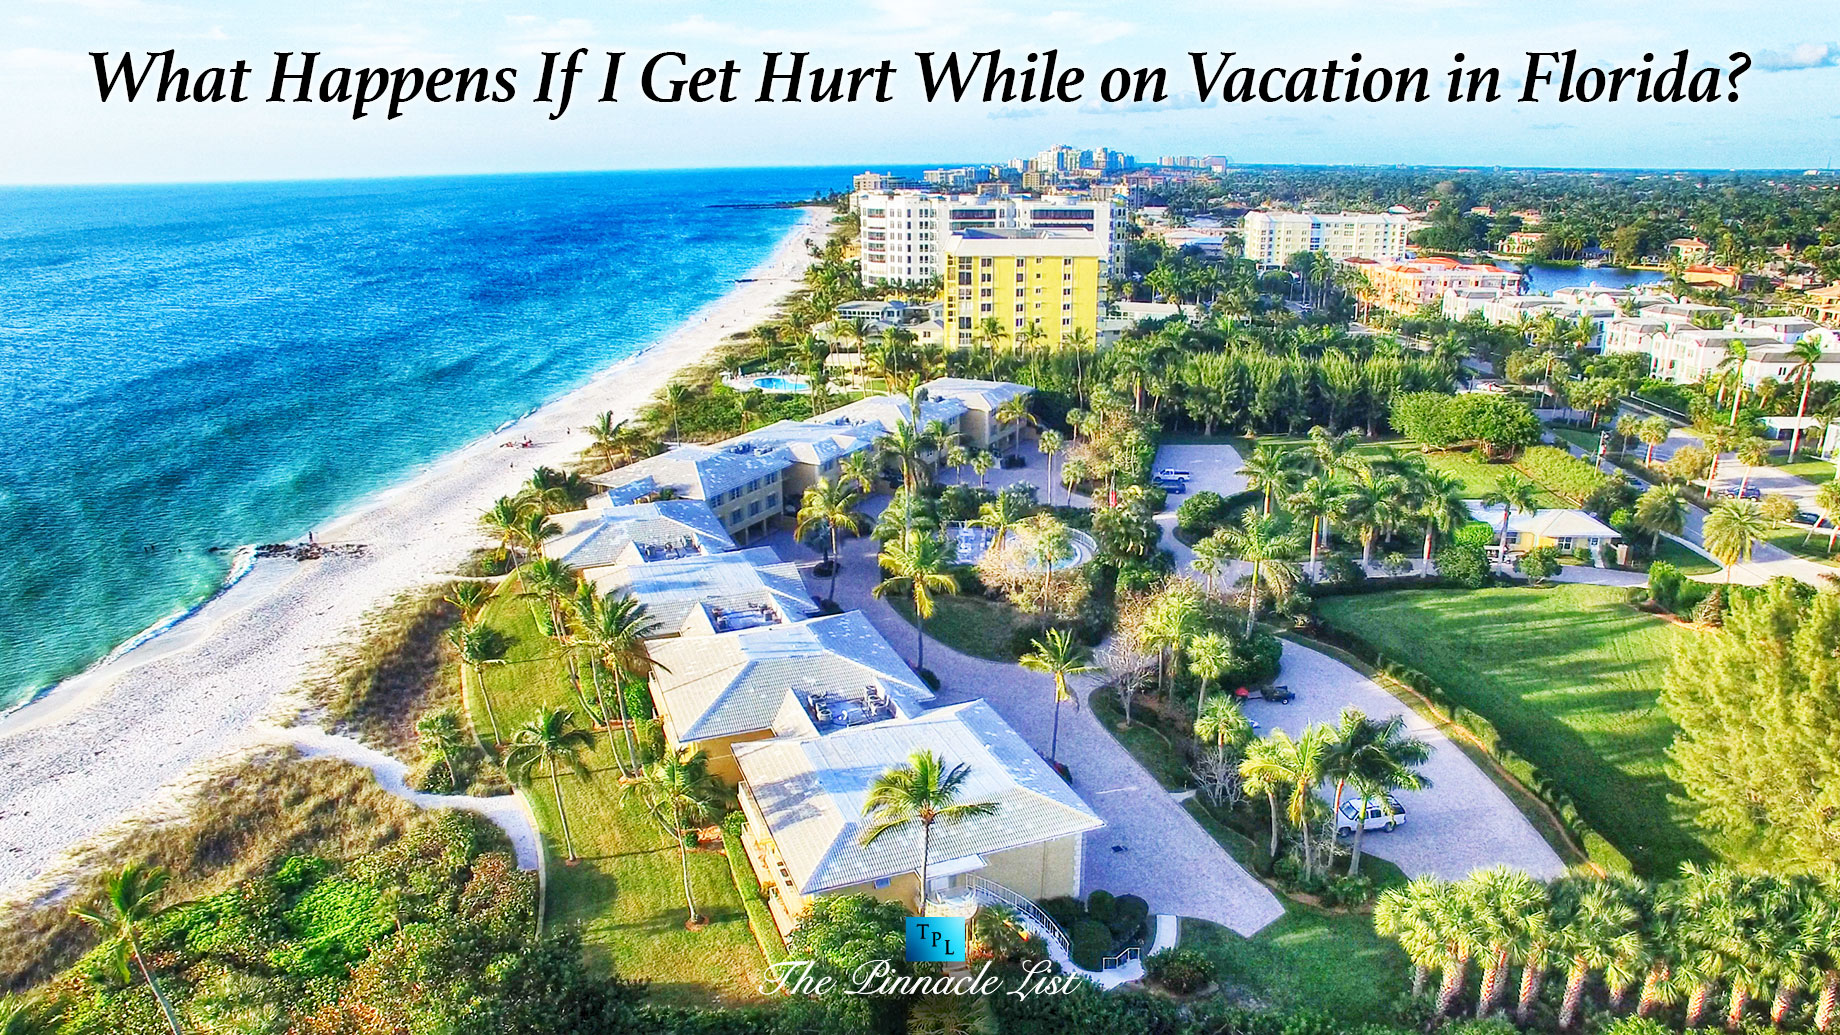 What Happens If I Get Hurt While on Vacation in Florida?